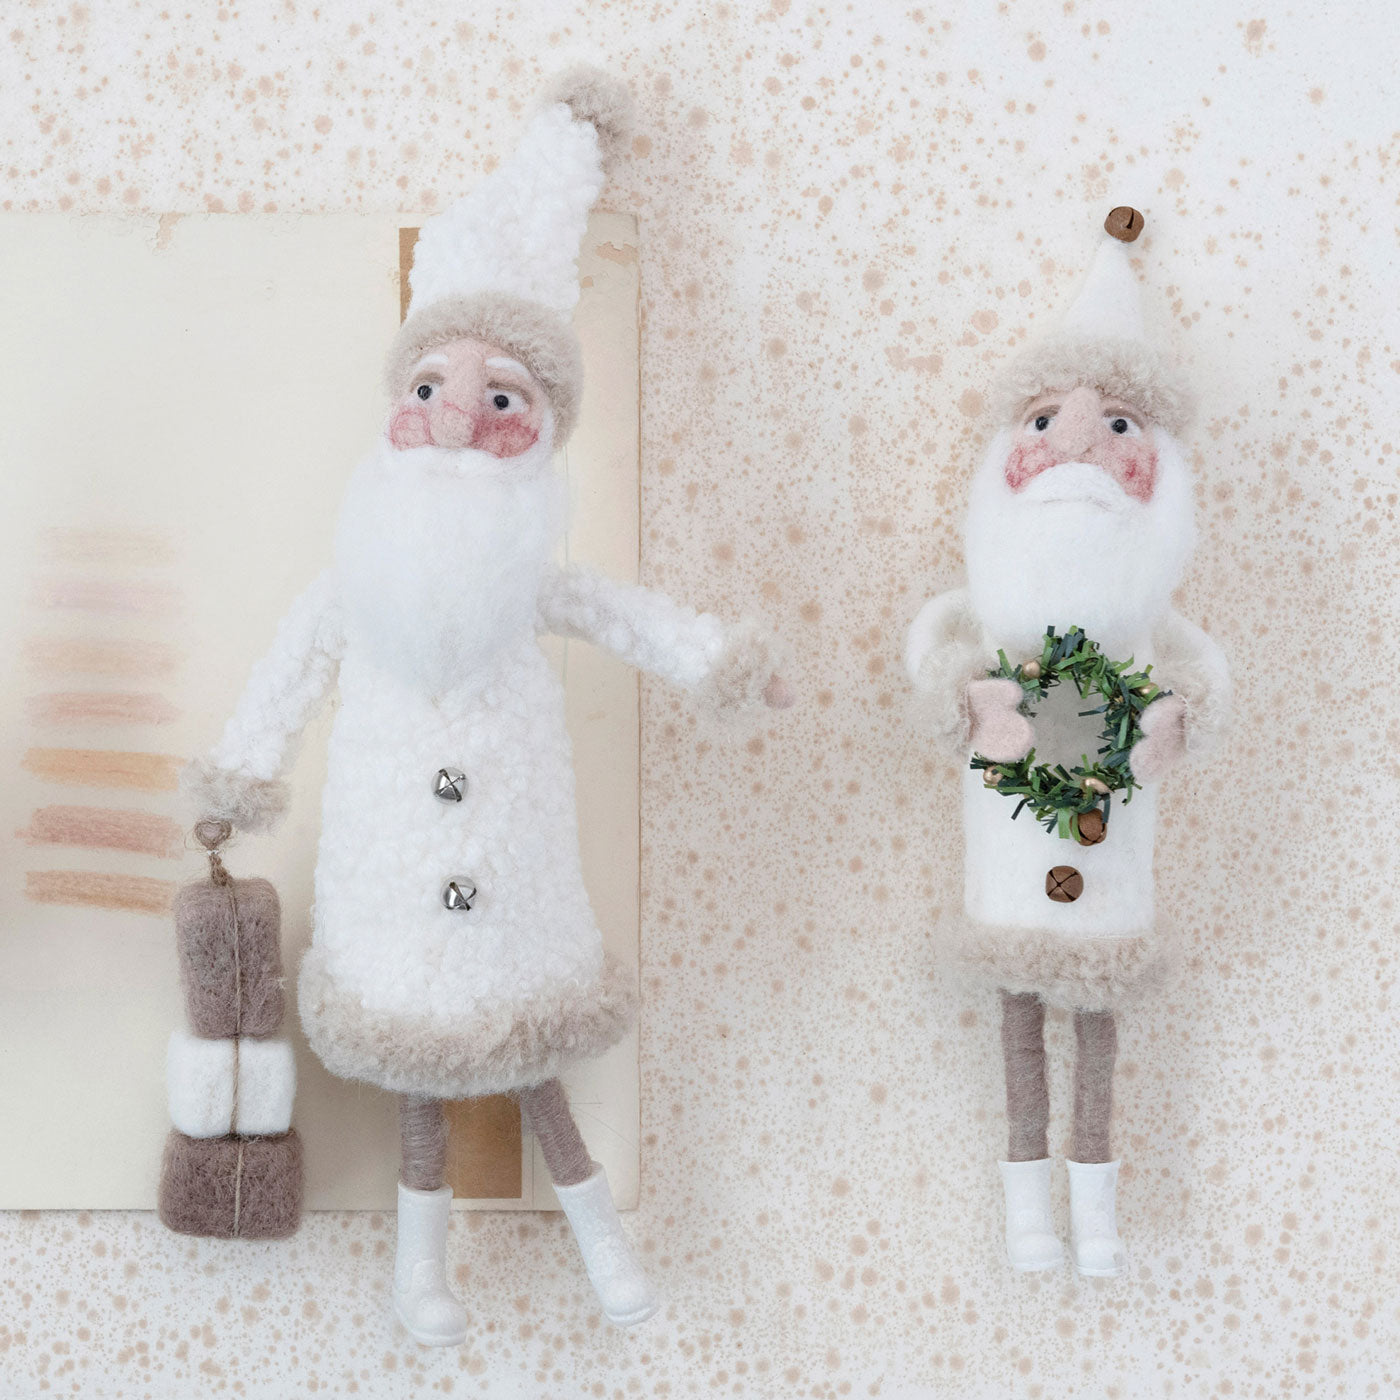 Creative Co-op Wool Felt Santa Decoration - Cream Outfit with Jingle Bell Buttons